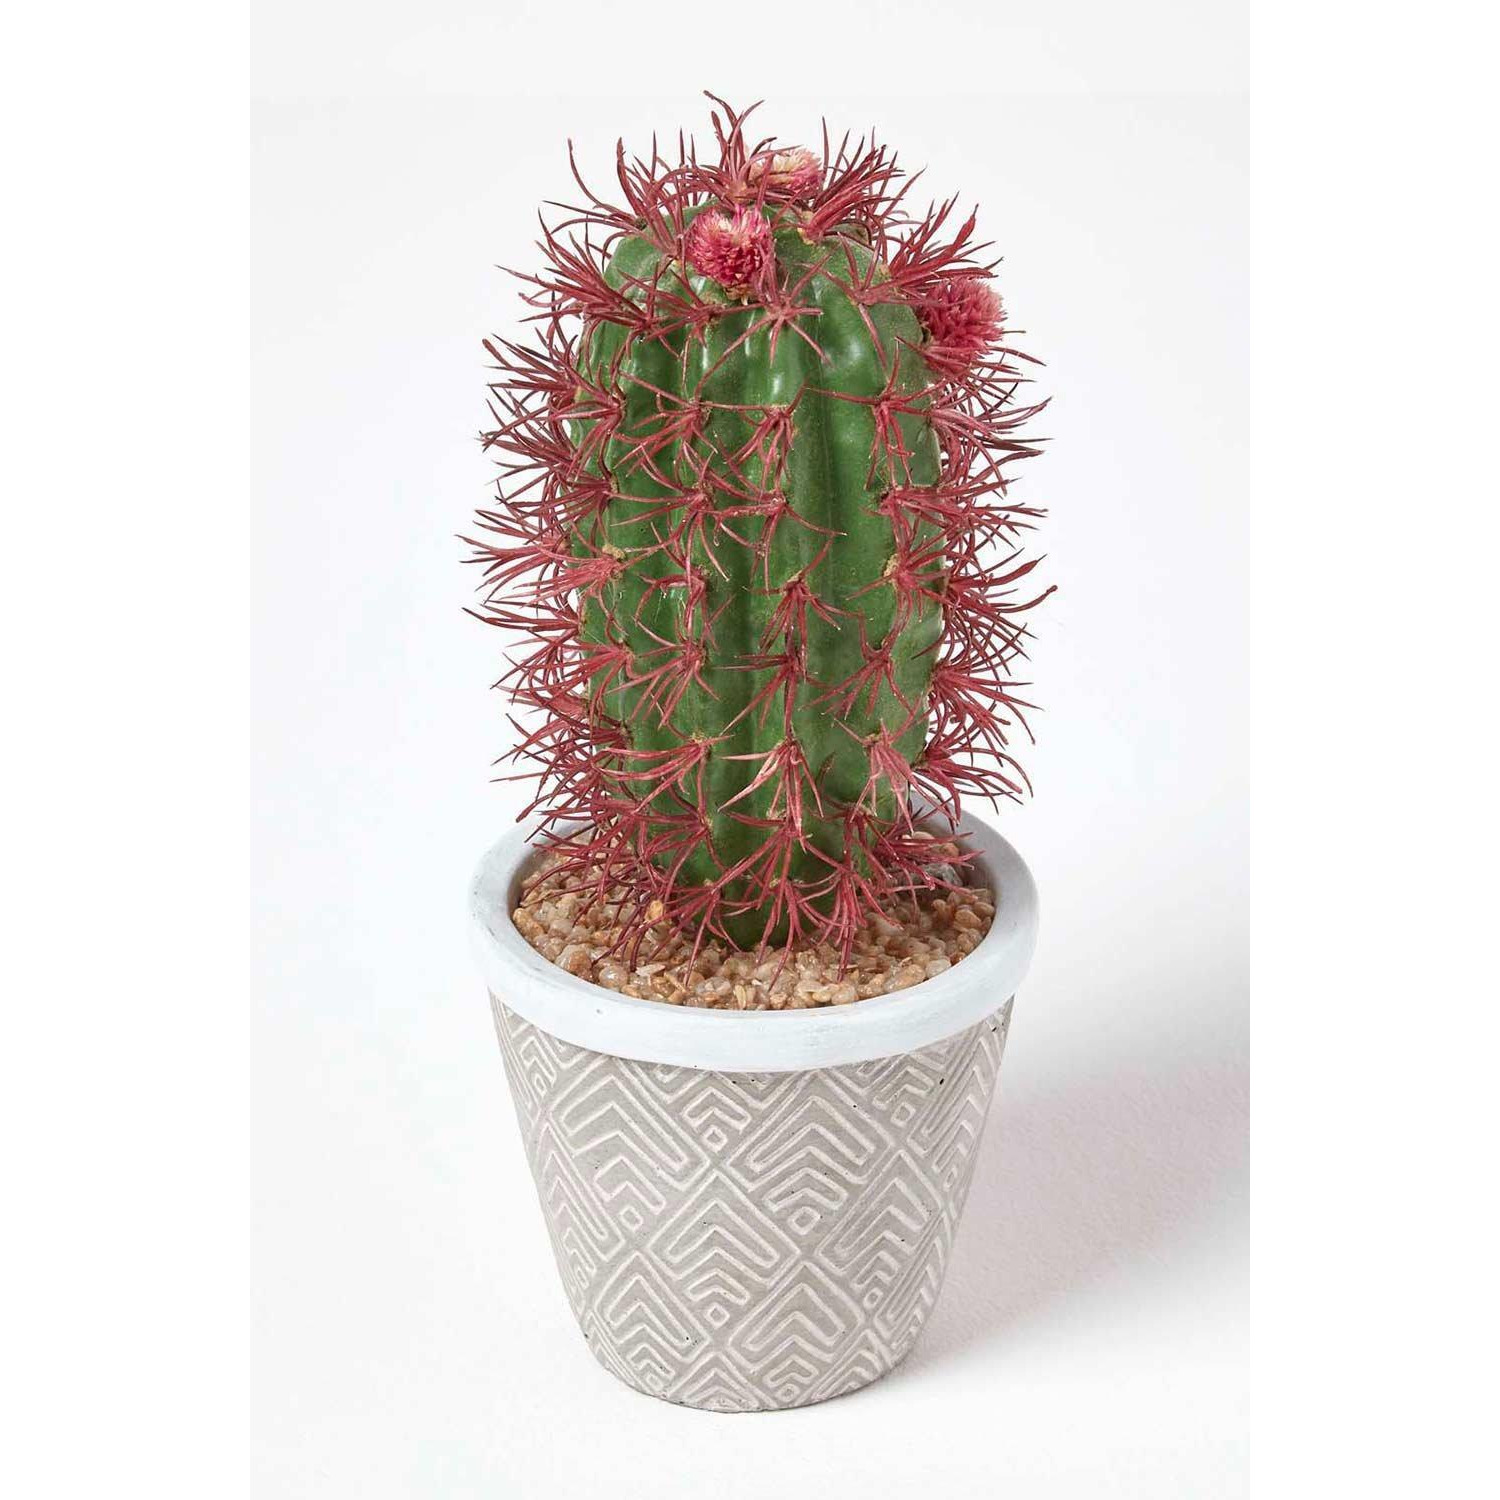 Denmoza Artificial Cactus with Flowers in Patterned Pot, 25 cm Tall - image 1